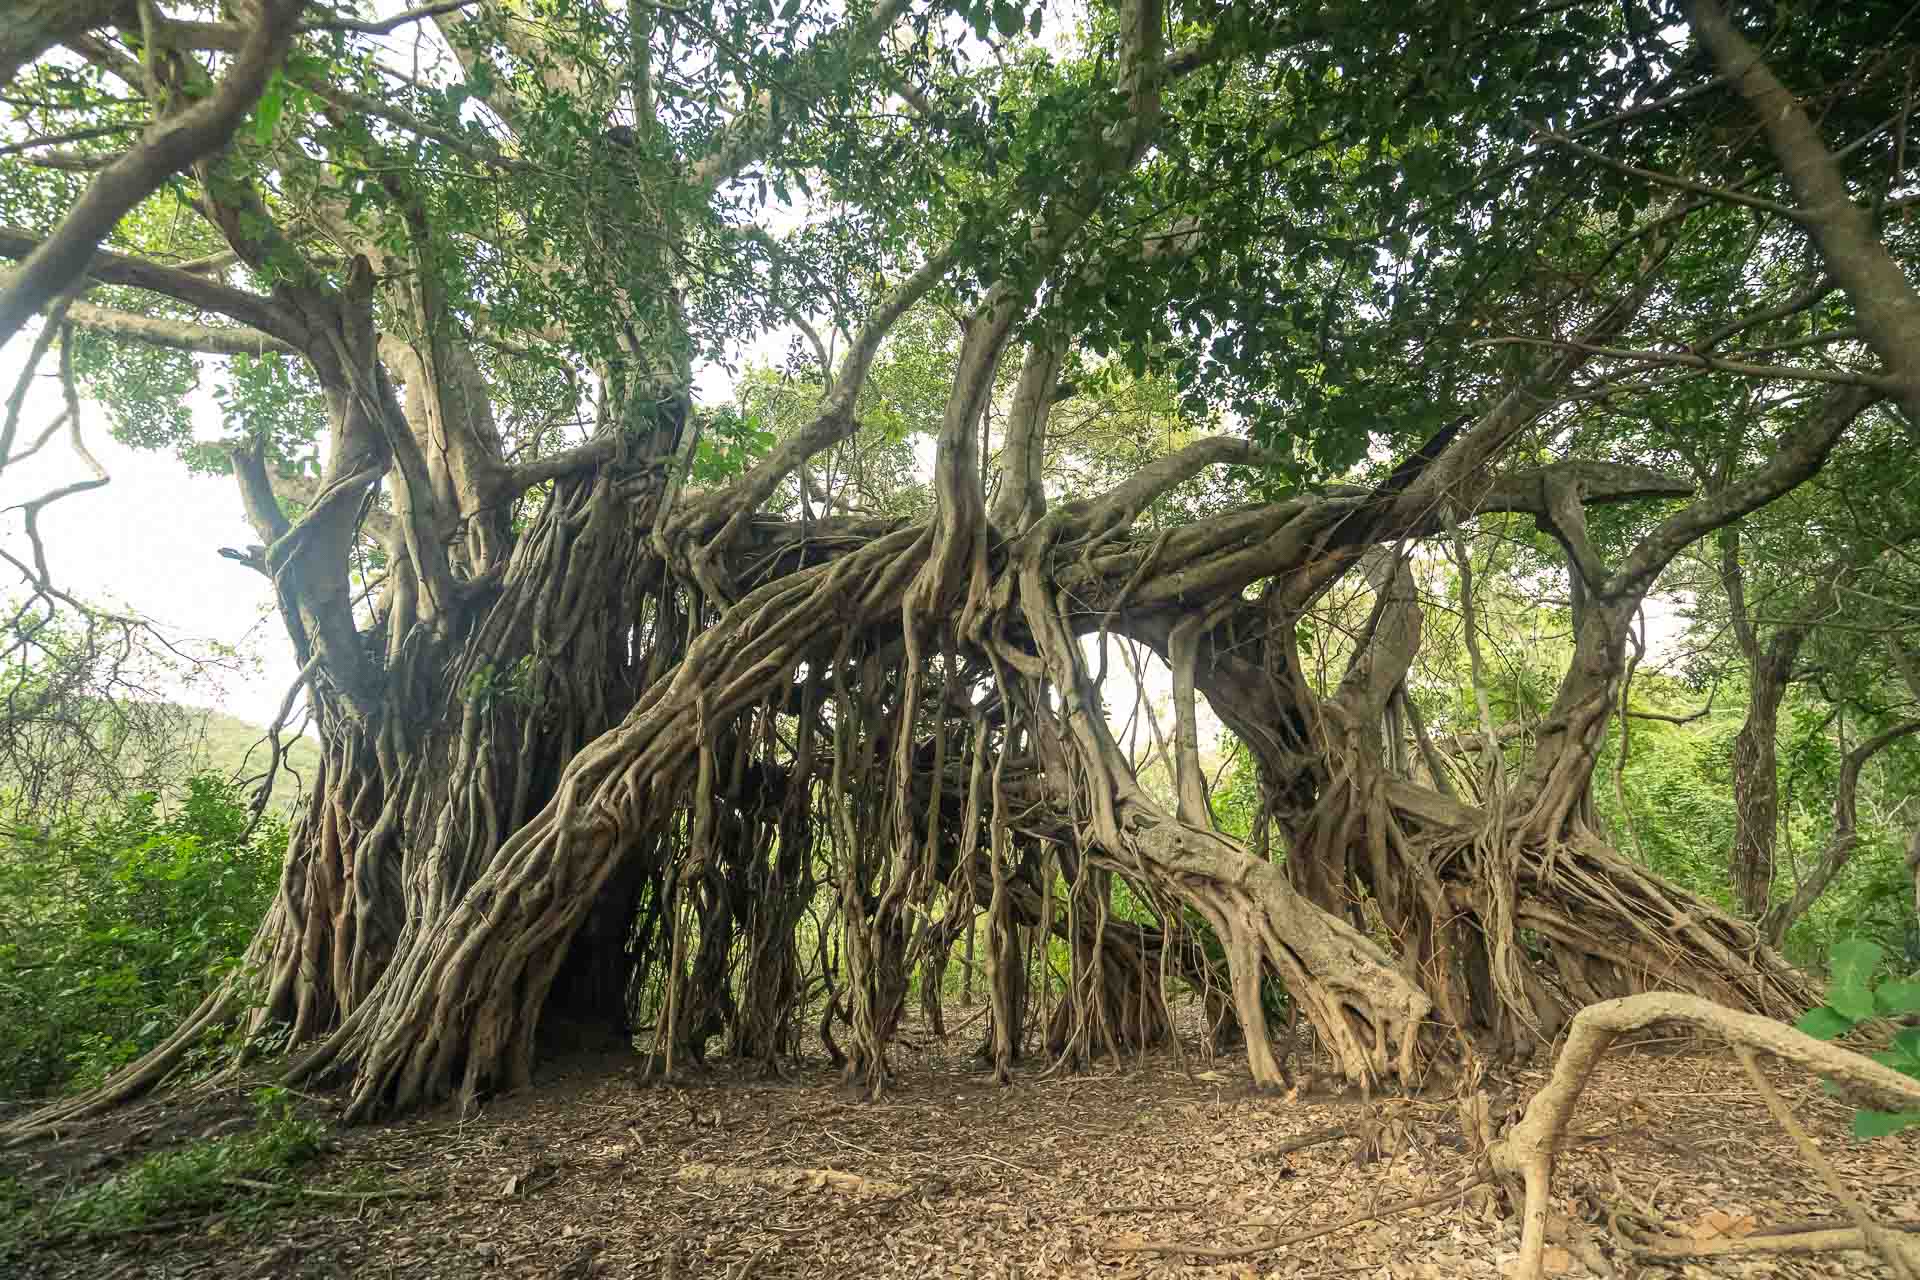 A large tree with many roots from the trunk to the floor